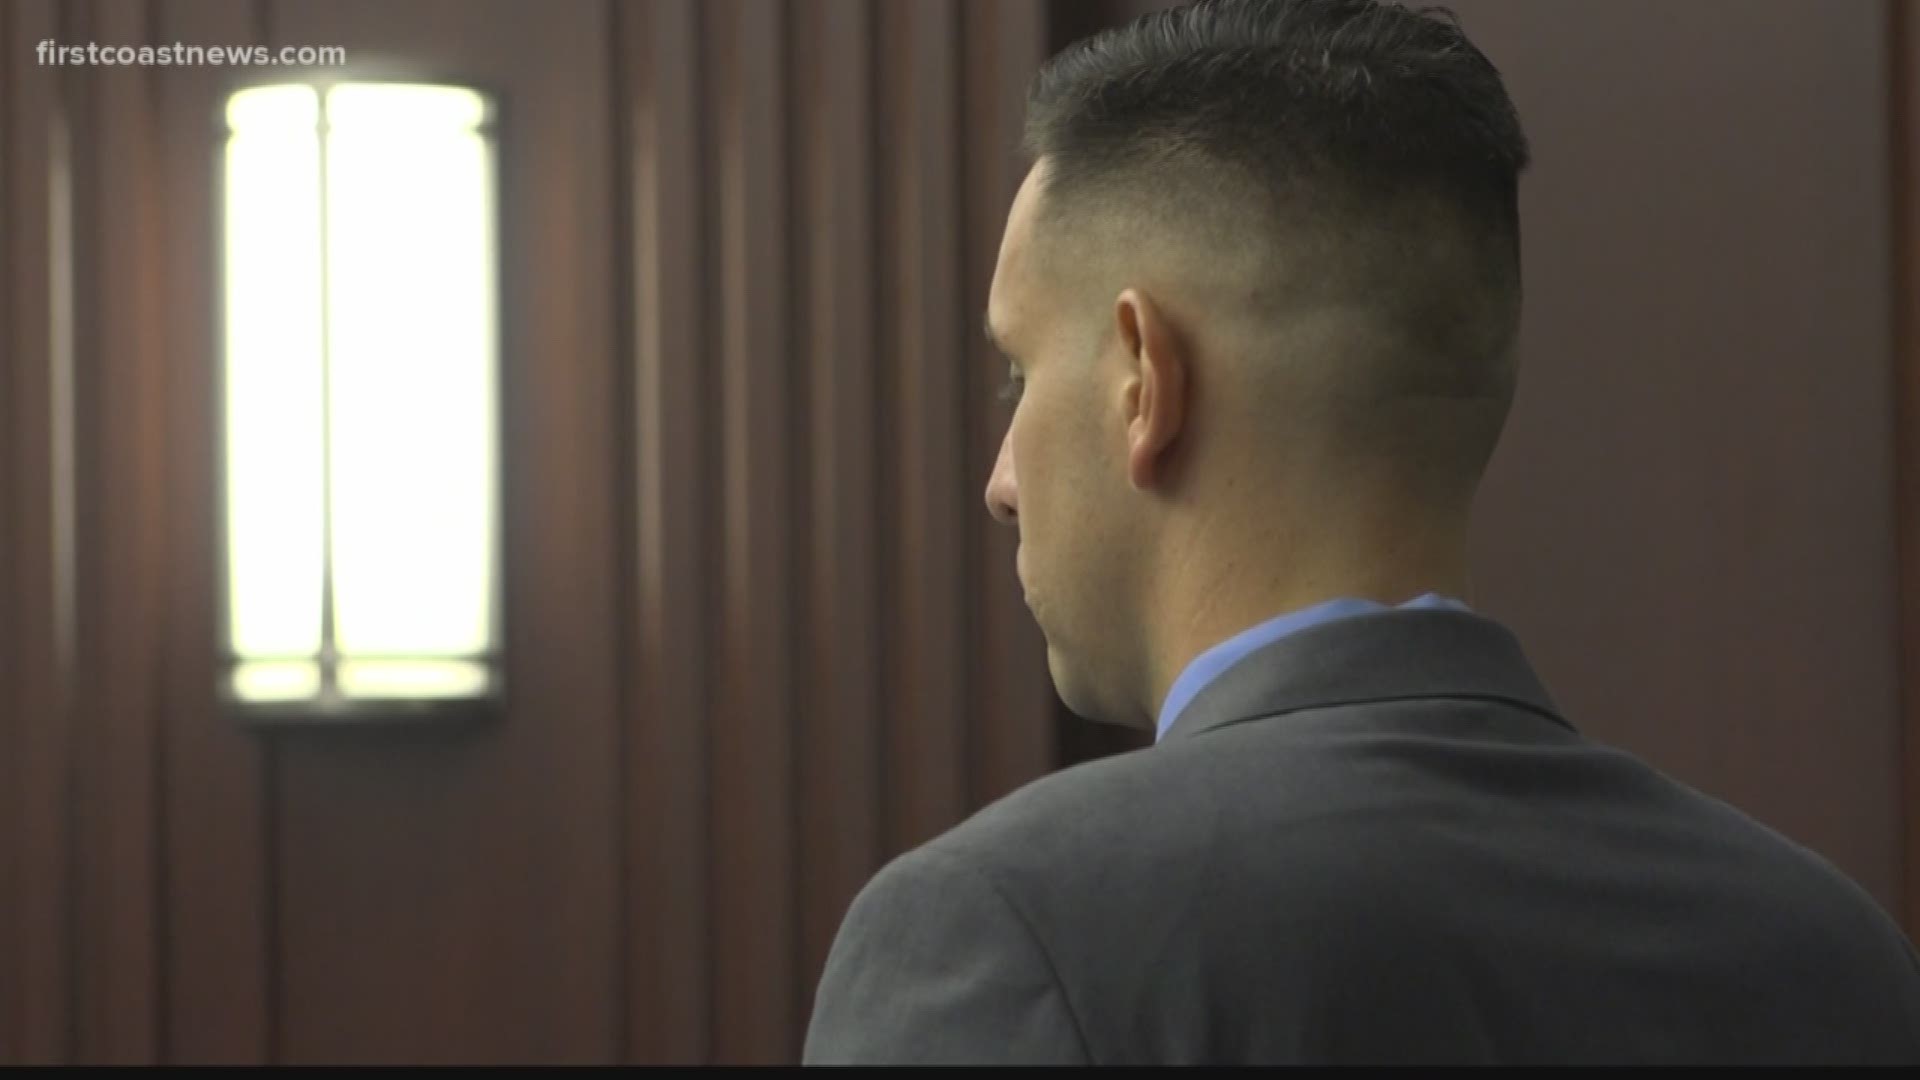 On Wednesday the bond was reduced for Marine staff sergeant Bruno Bego, charged in the burglary of his estranged wife.